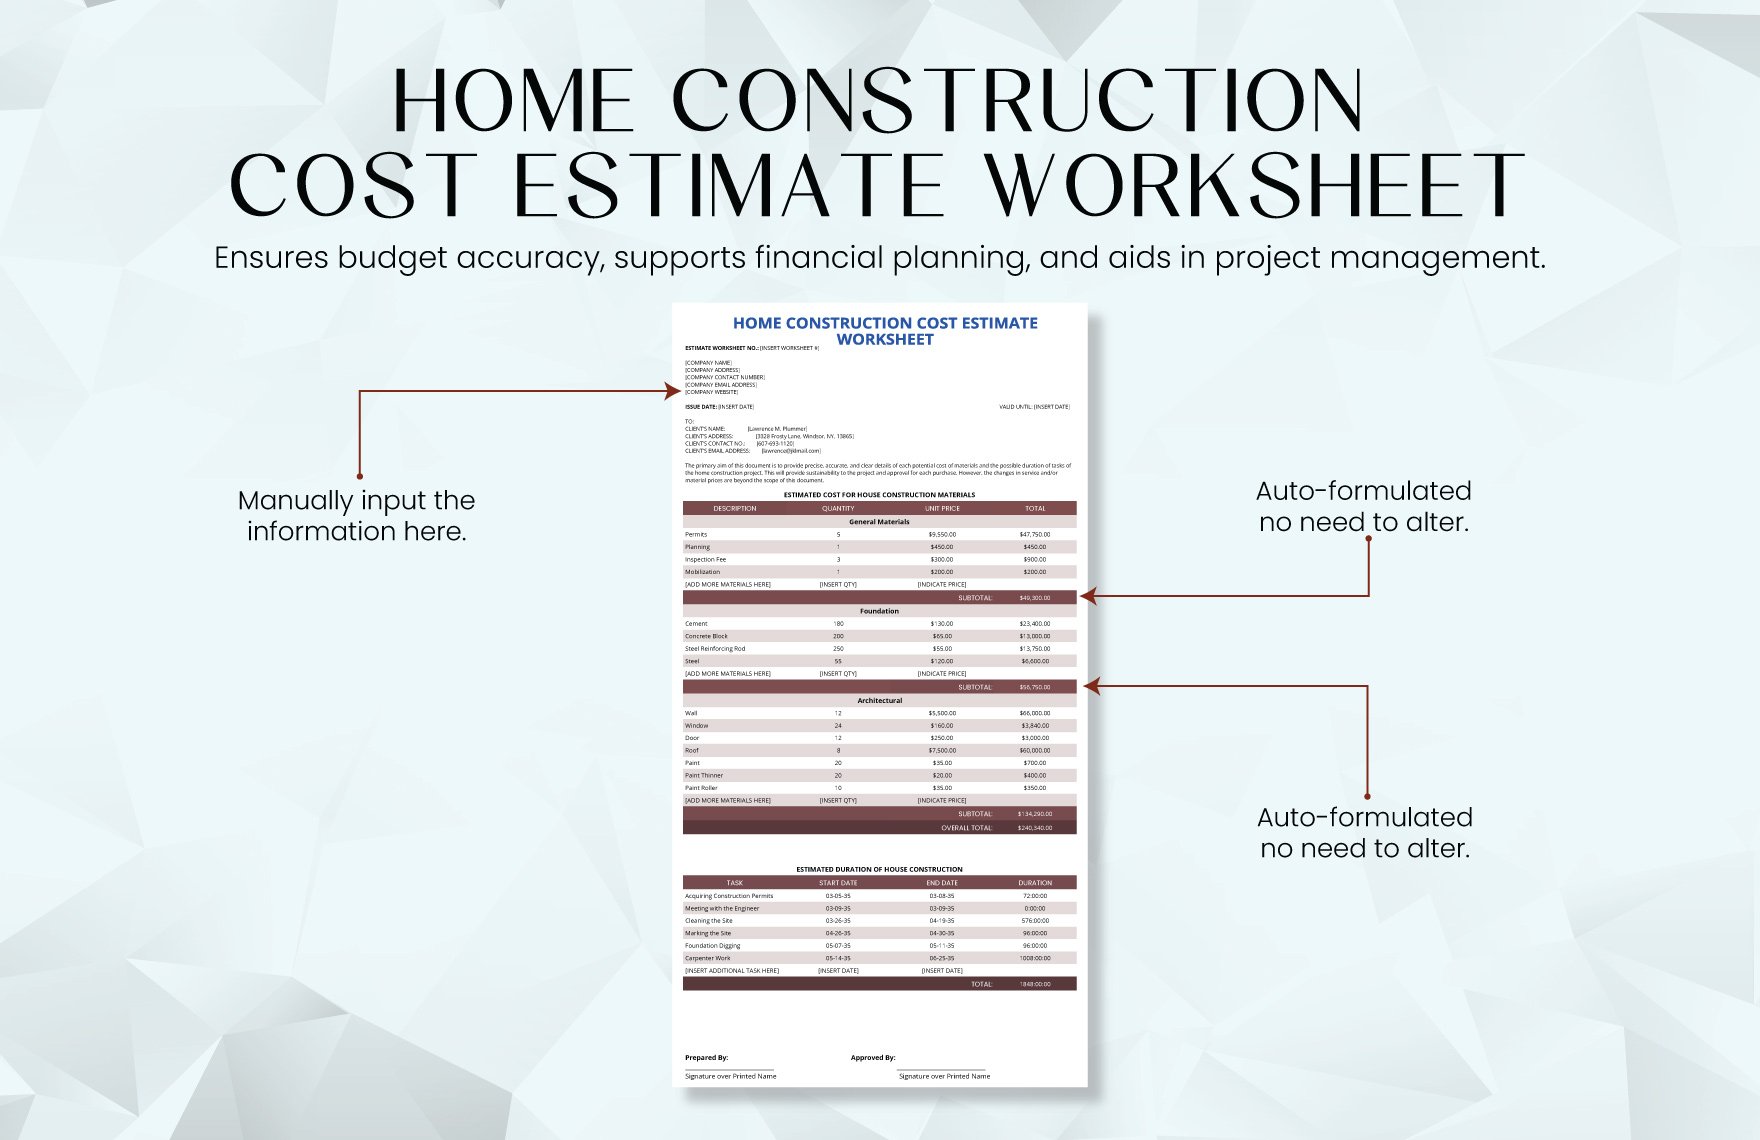 Home Construction Cost Estimate Worksheet Template